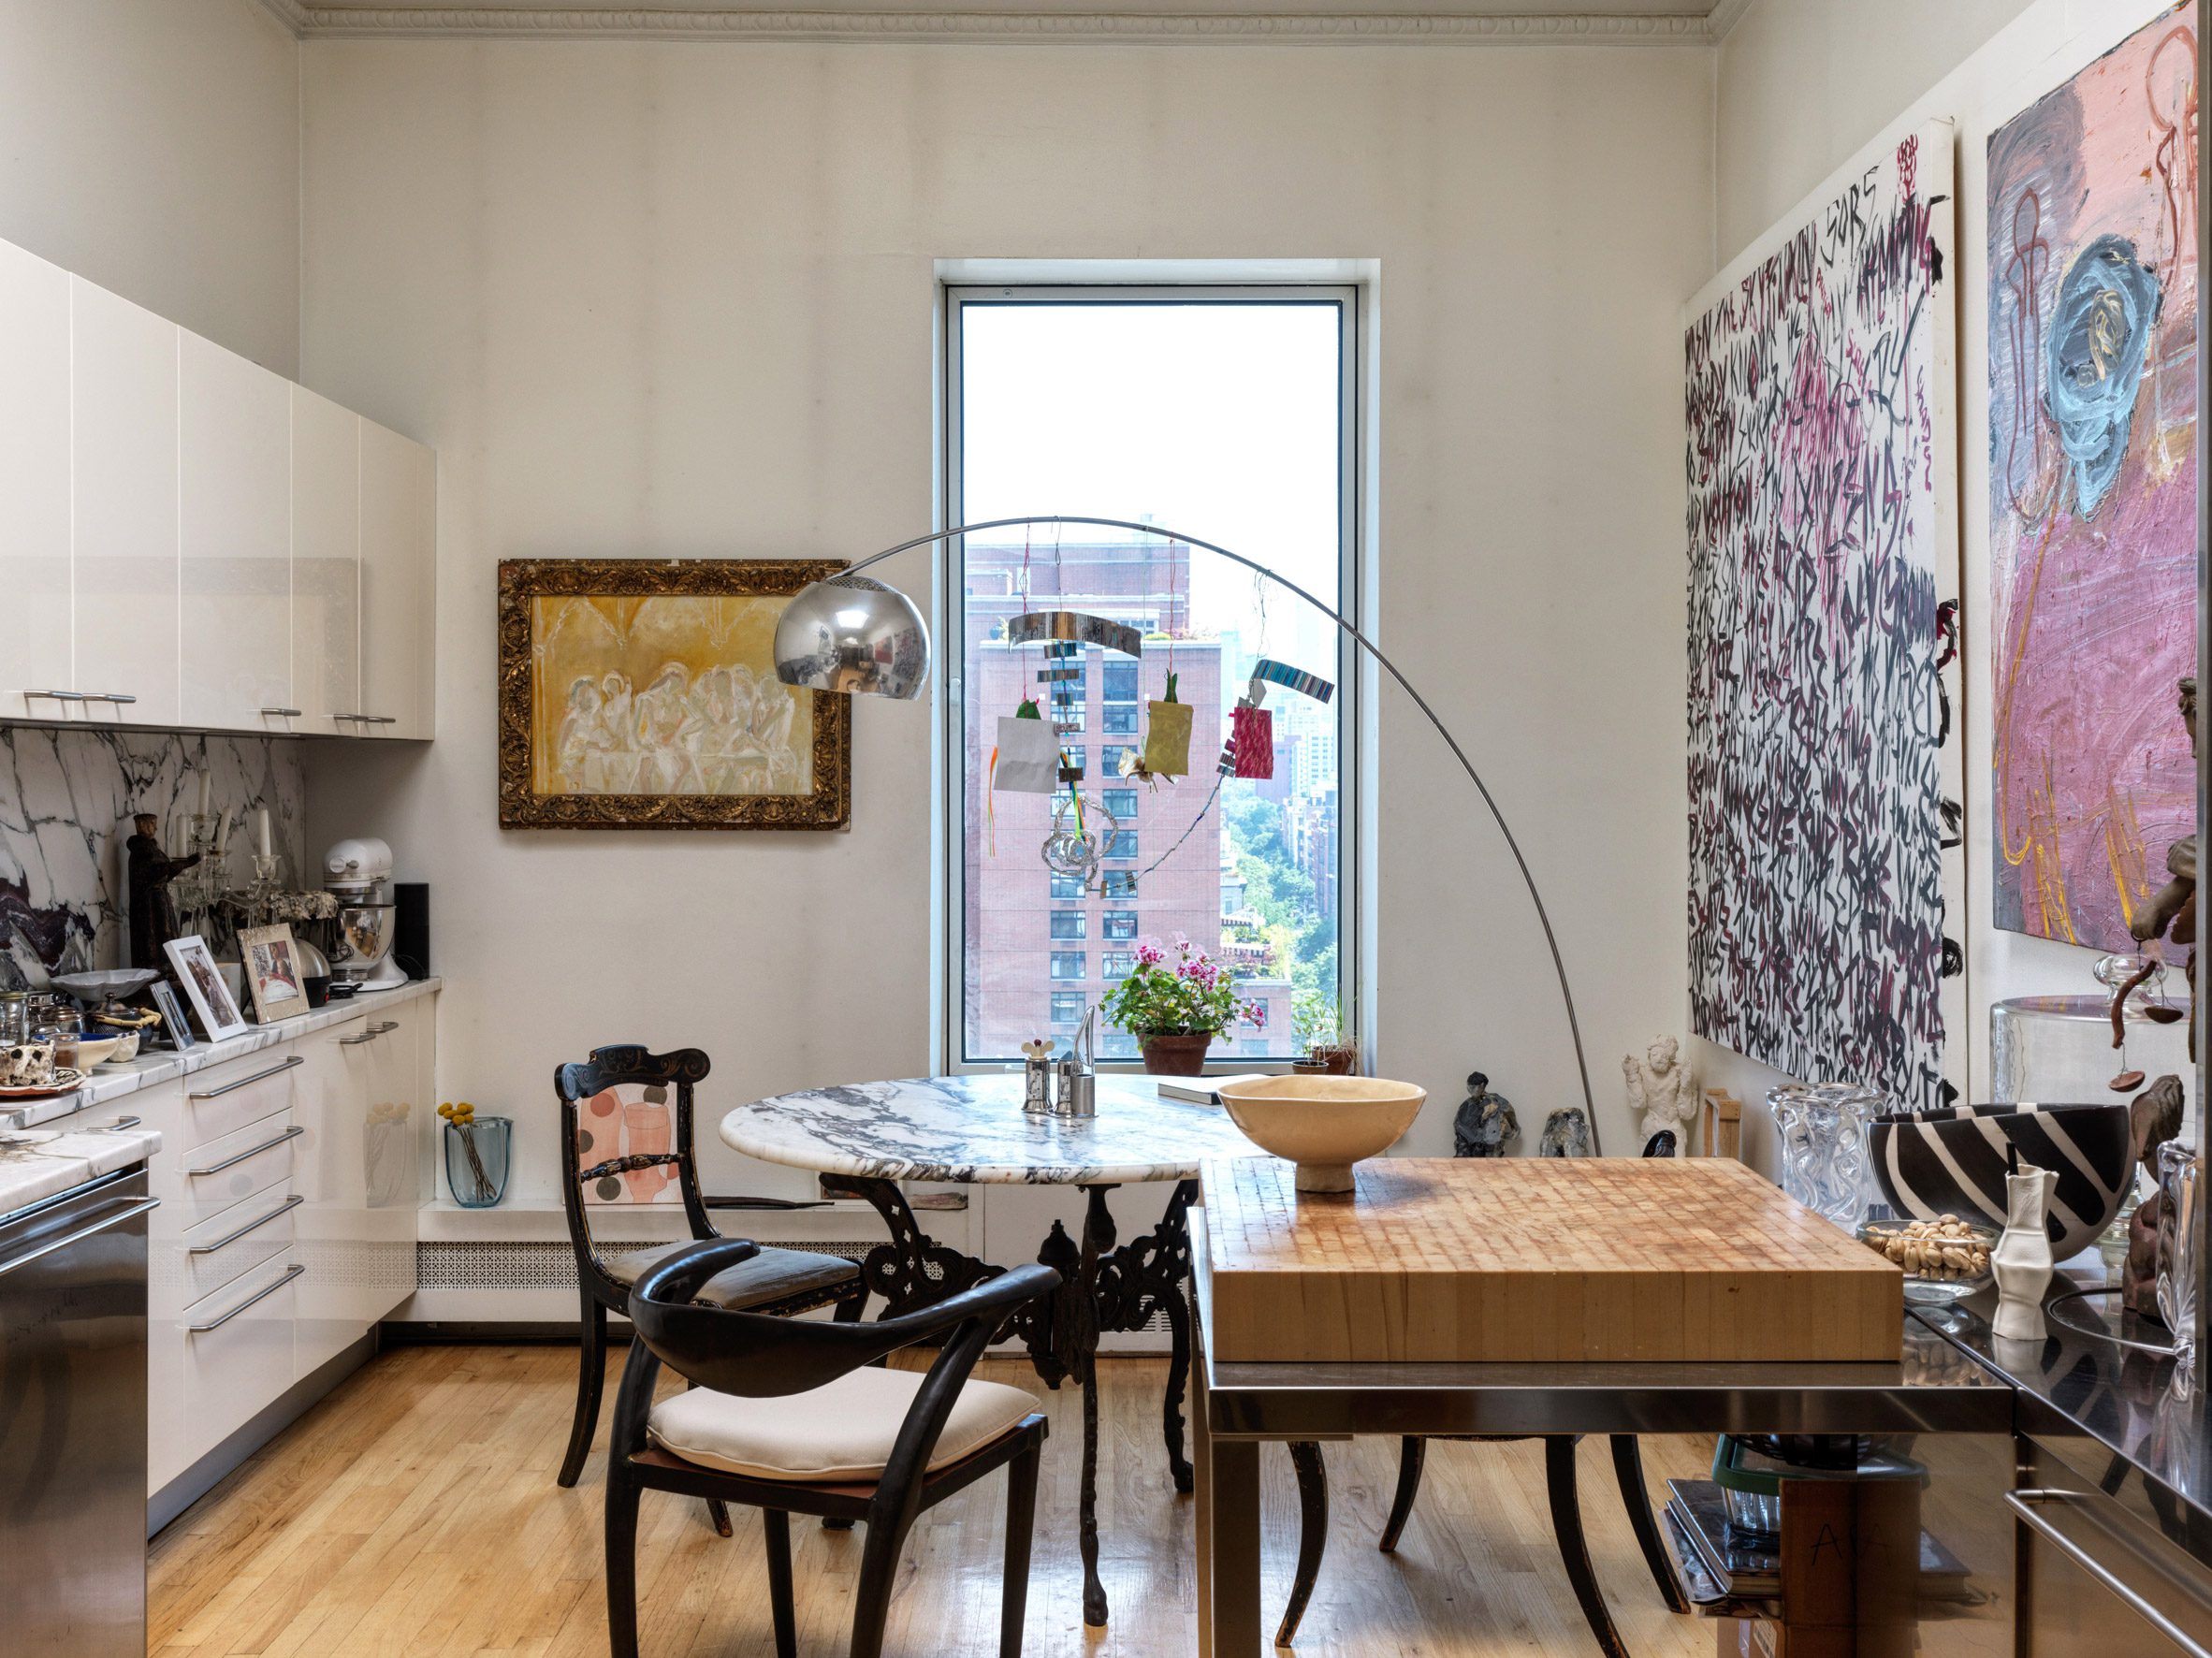 Eclectic mix of furniture and artwork in a kitchen